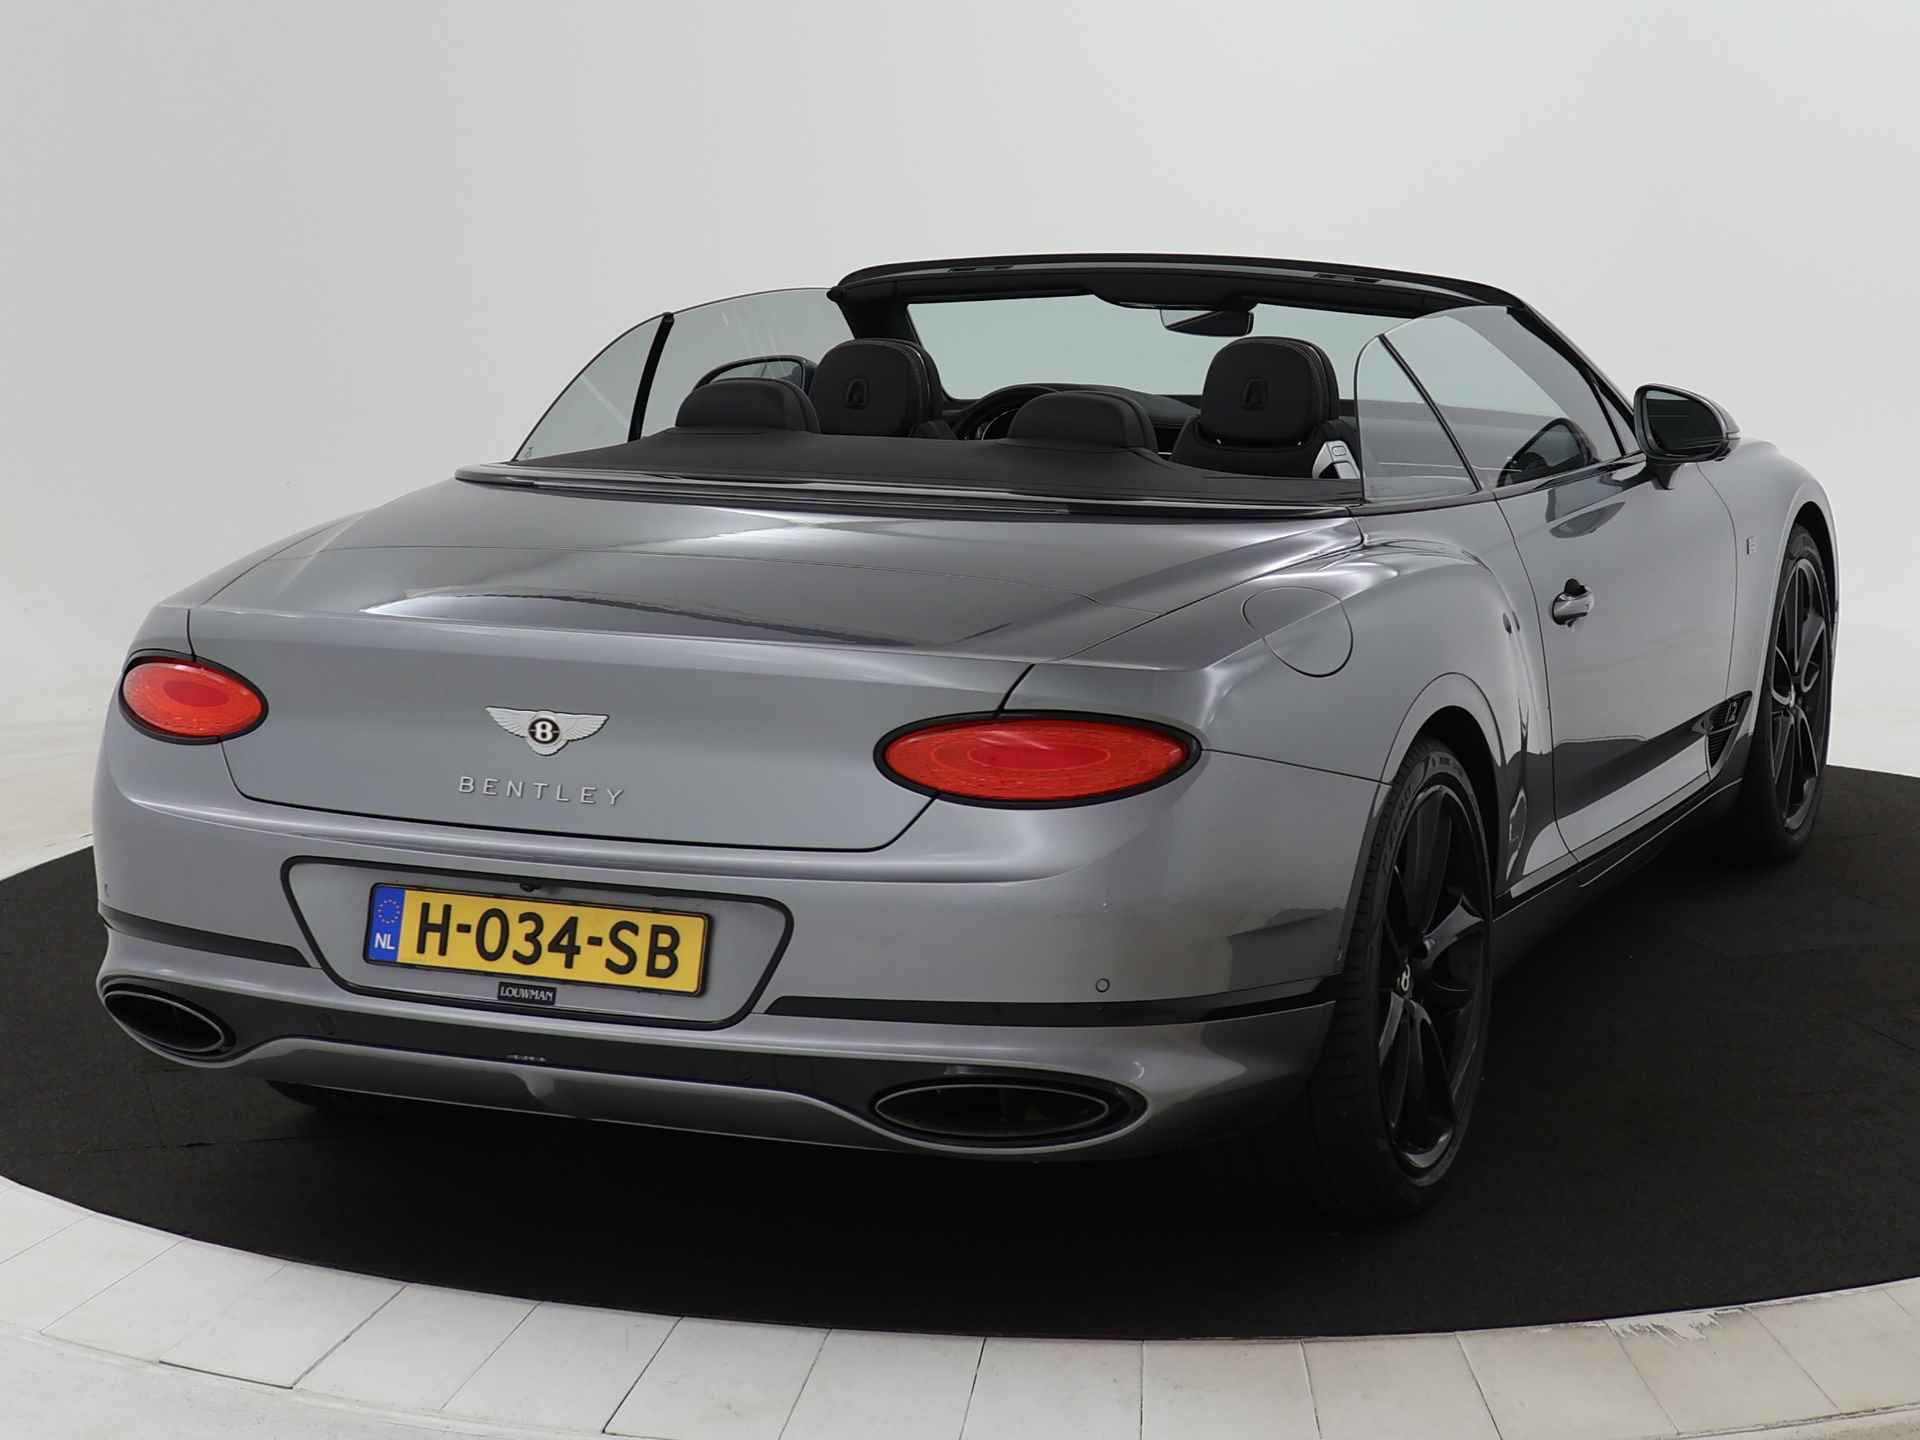 Bentley Continental GTC 6.0 W12 First Edition Mulliner - Bang & Olufsen - Black package - Massage seats - 14/46